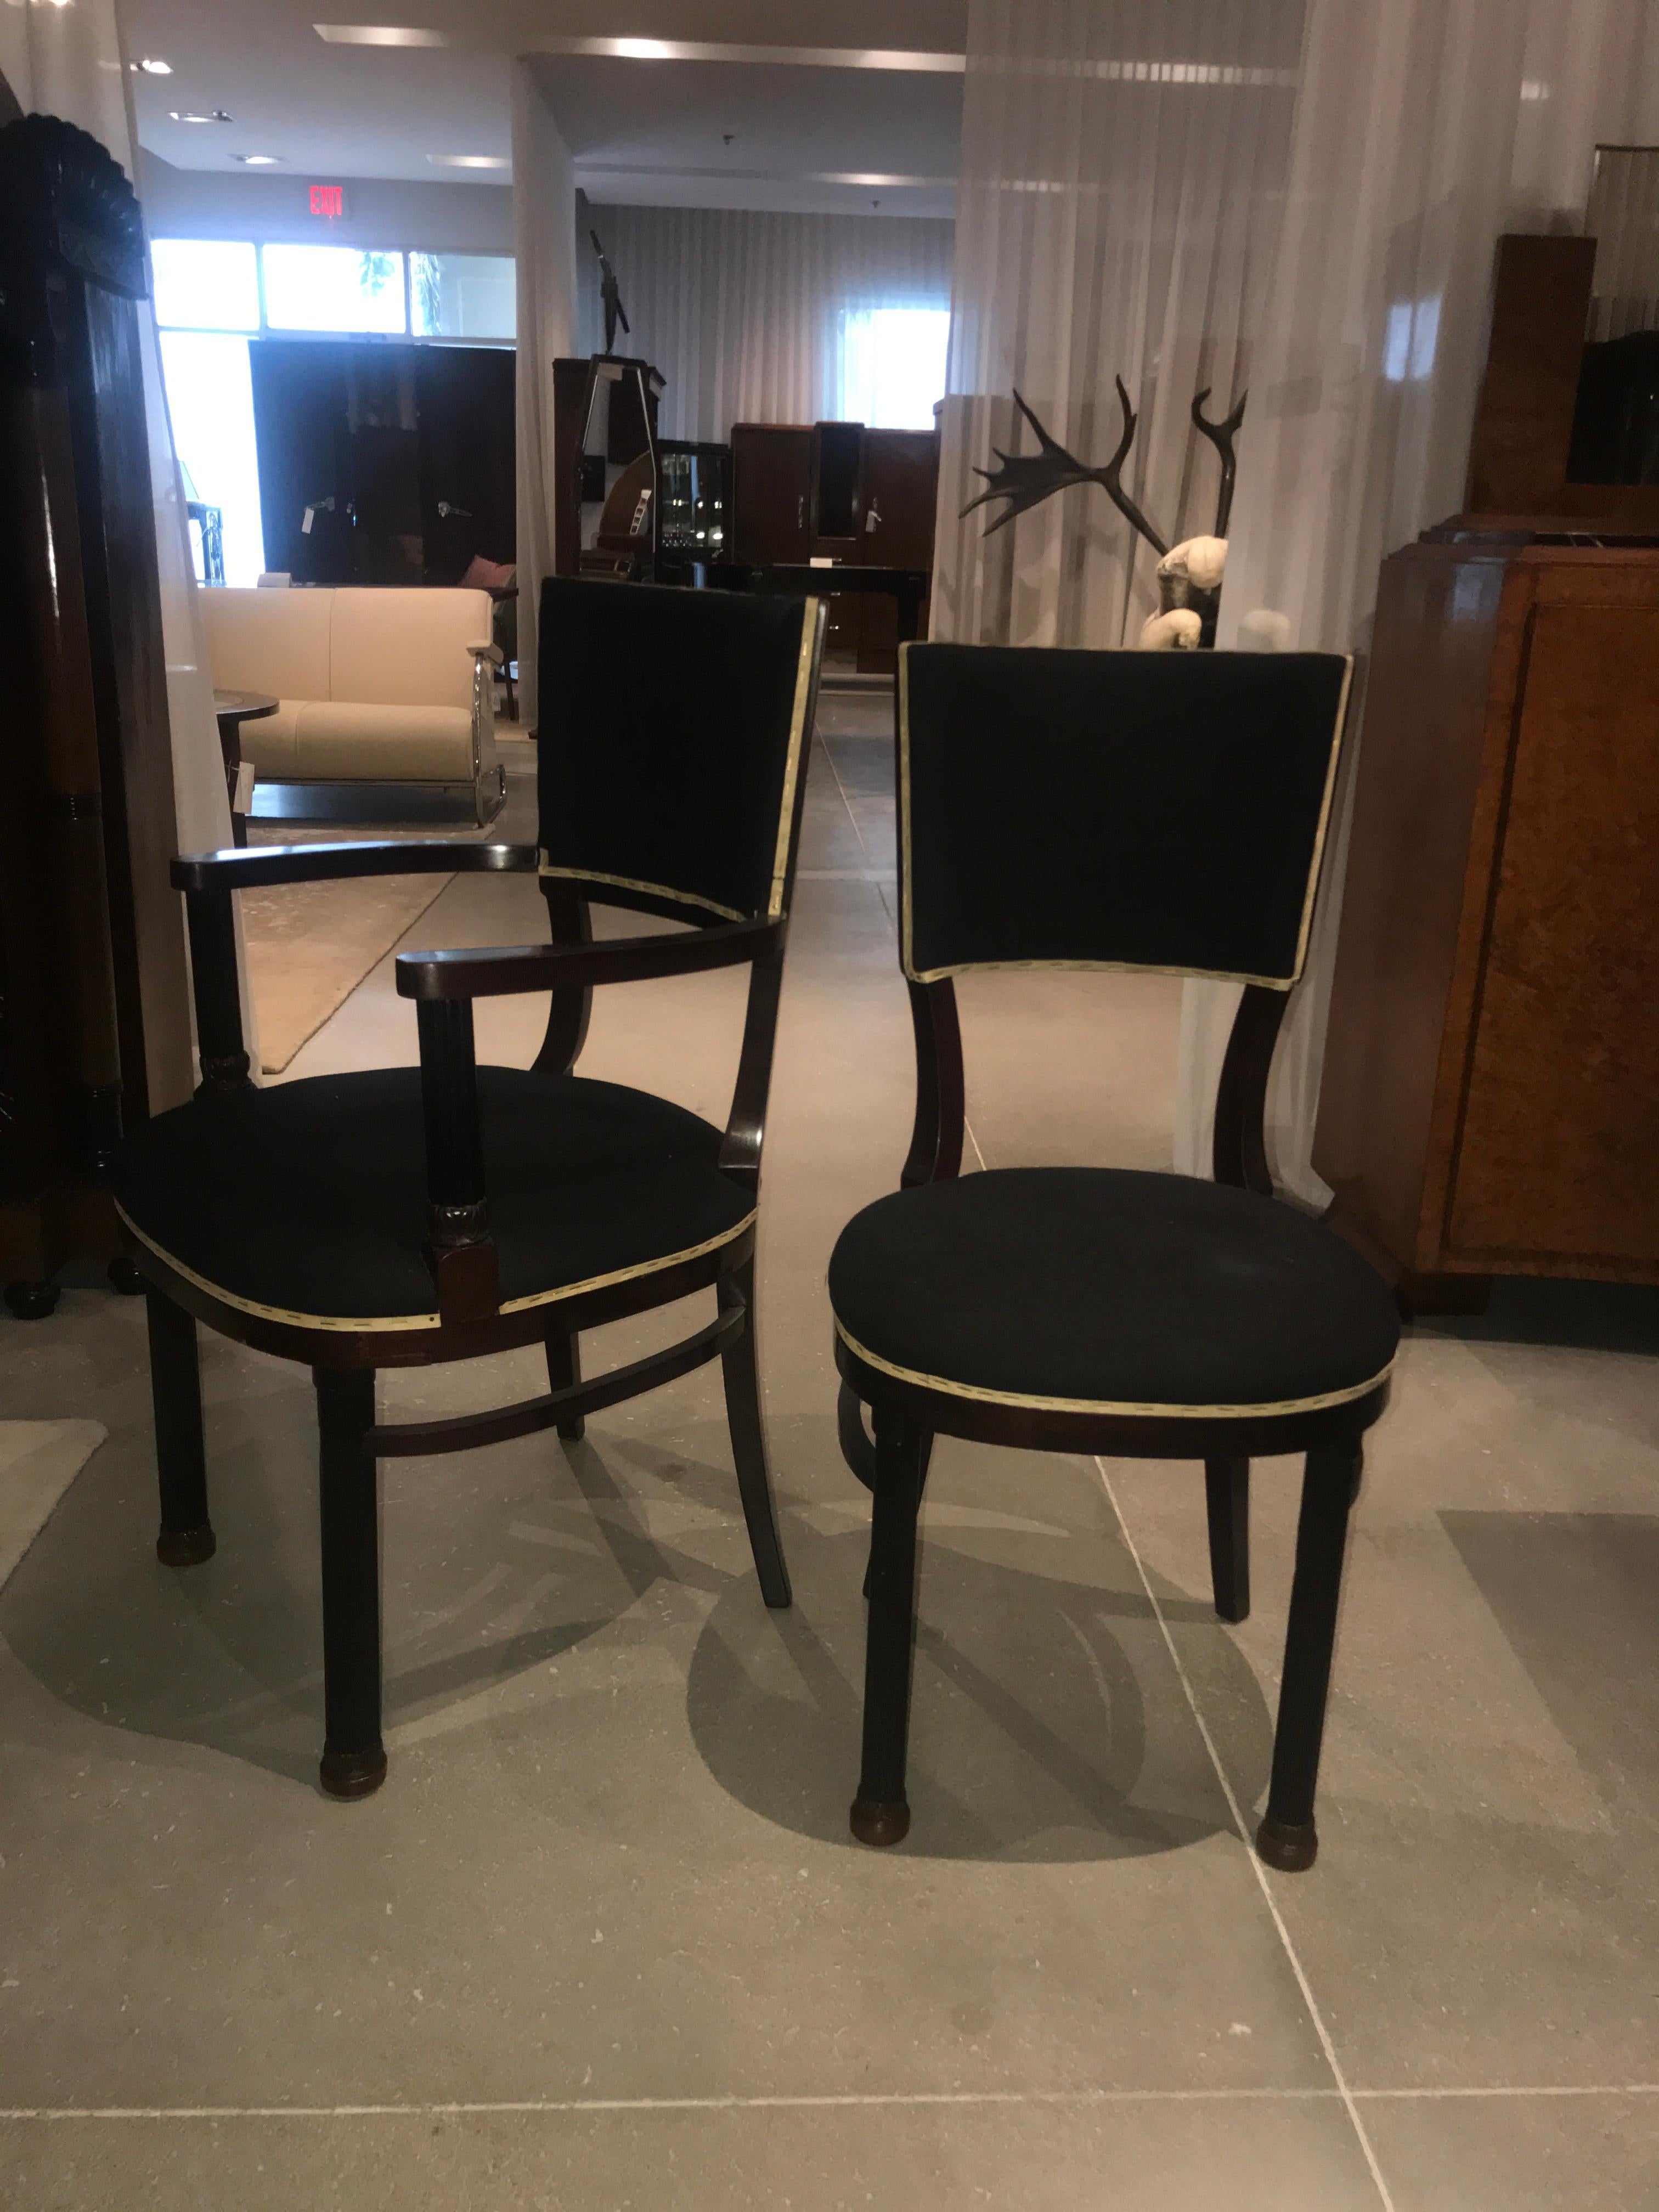 Set of 12 Sezession Dining Chairs – 2 arm chairs, 10 side chairs - early Art Deco designed for Horne Castle of the Baron Steinlein family. Manufactured by O. Strnad. PLEASE NOTE: PRICE IS PER CHAIR & NEED TO BE REUPHOLSTERED. Arm chair dimensions: